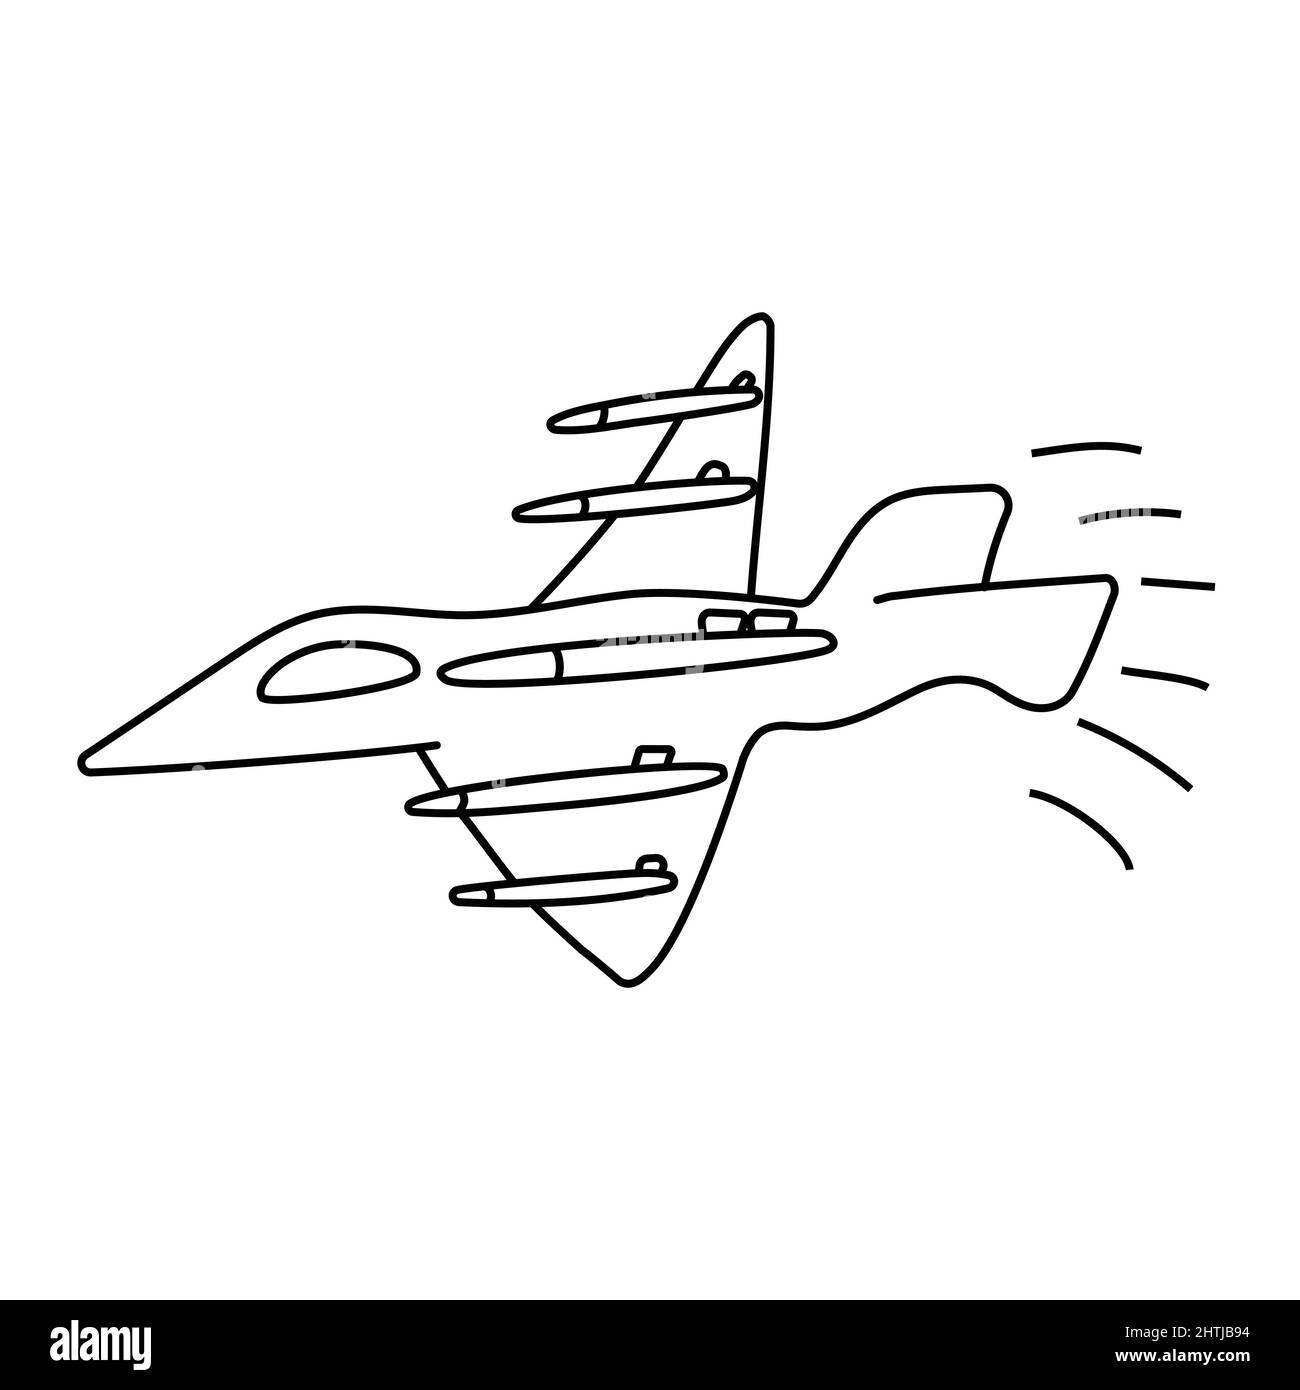 Flying military fighter with missiles. Weapons, warheads. Military aviation. Active military operations. Hand drawn prints and doodle. Stock Vector